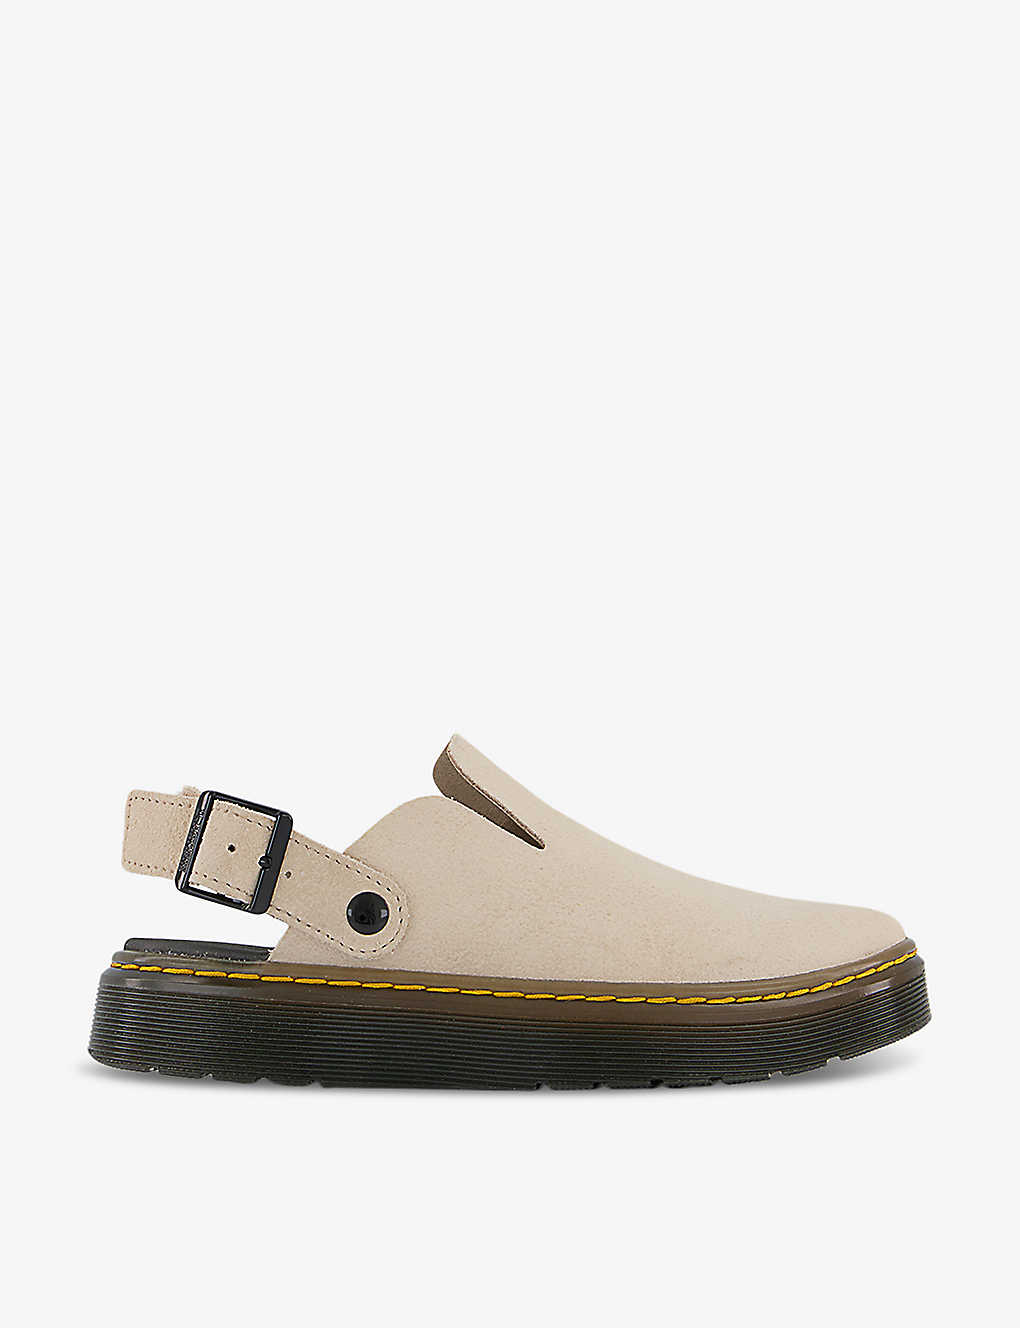 Shop Dr. Martens' Dr. Martens Women's Warmsand Carlson Contrast-stitched Suede Mules